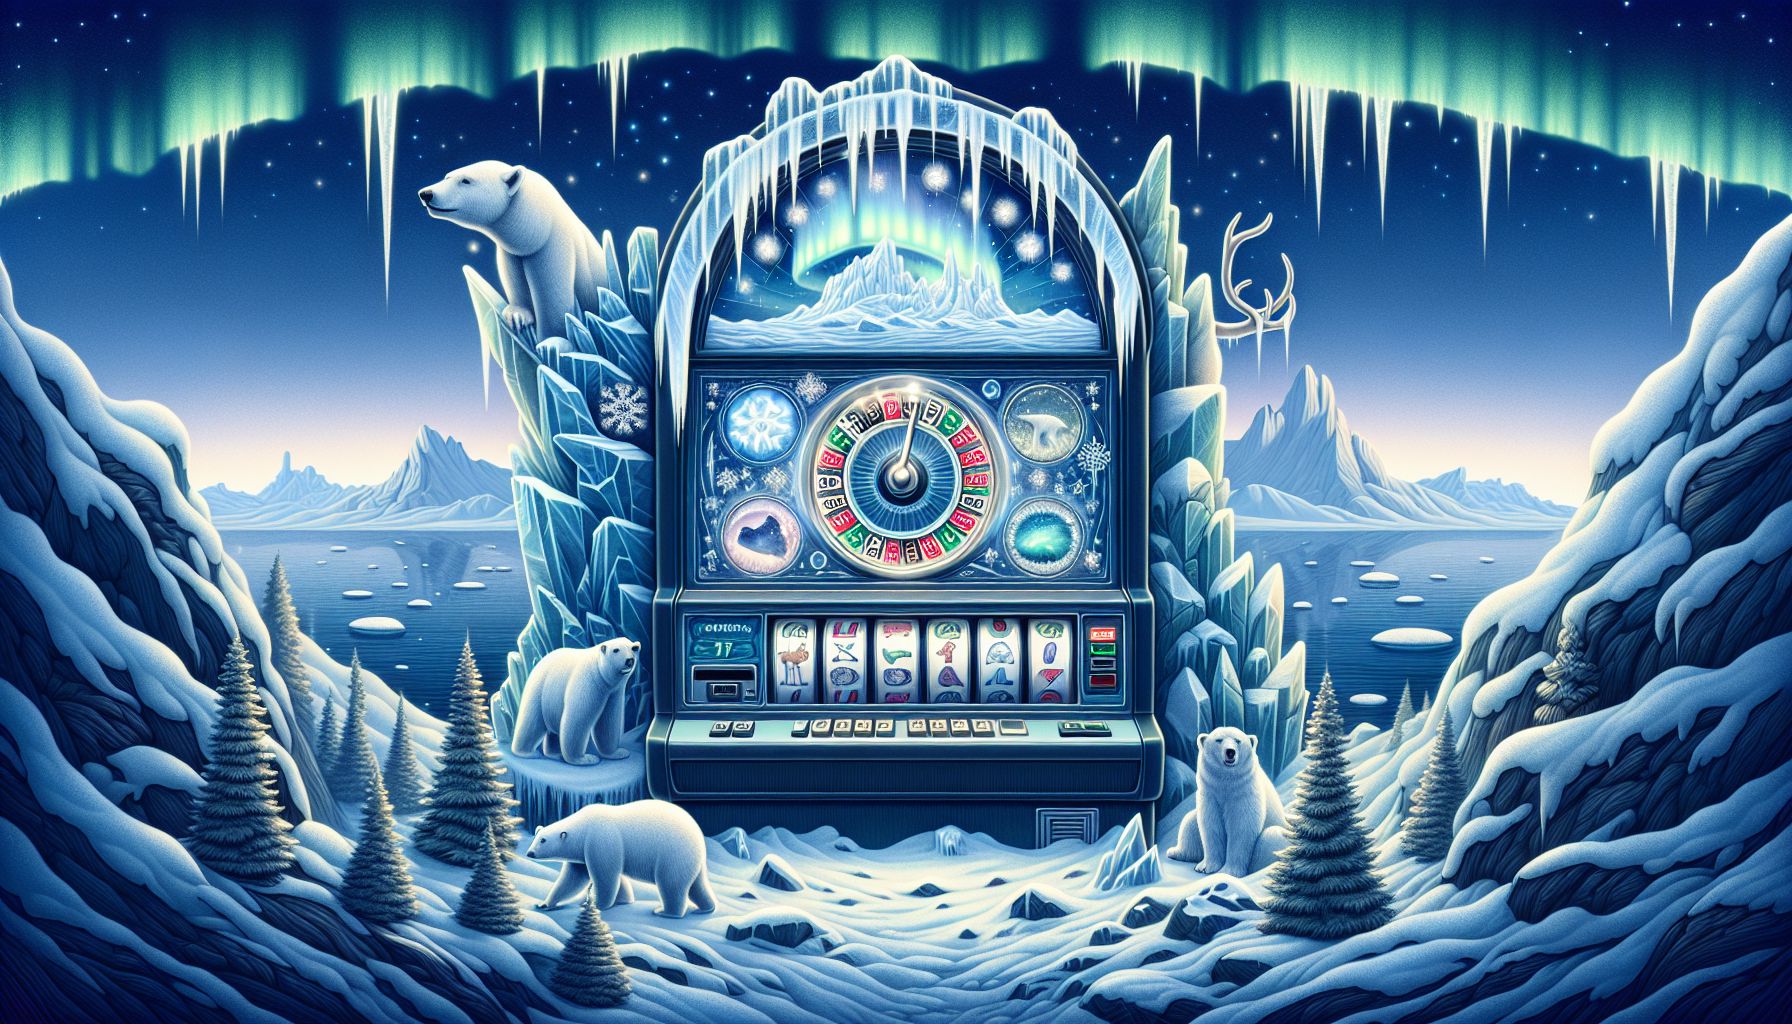 #Frozen Fantasy: Exploring the Icy Riches of the North on Slot Machines